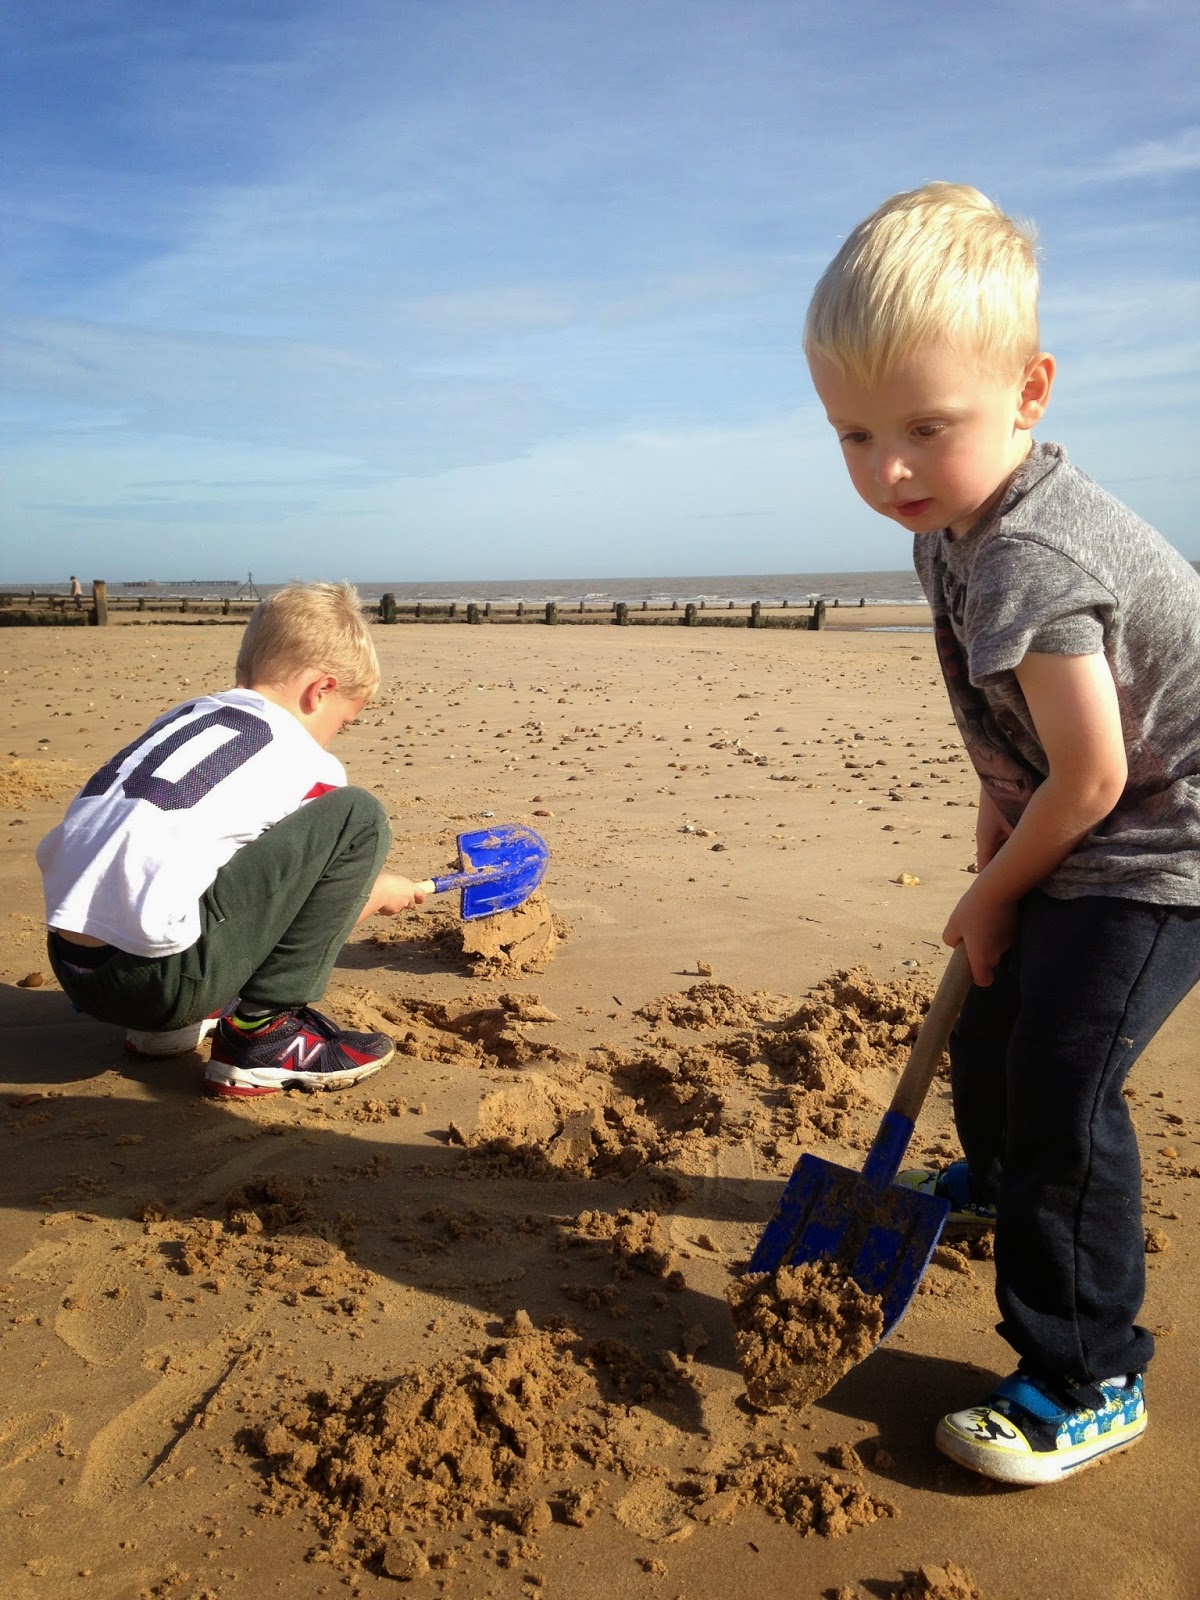 Playing sand castles